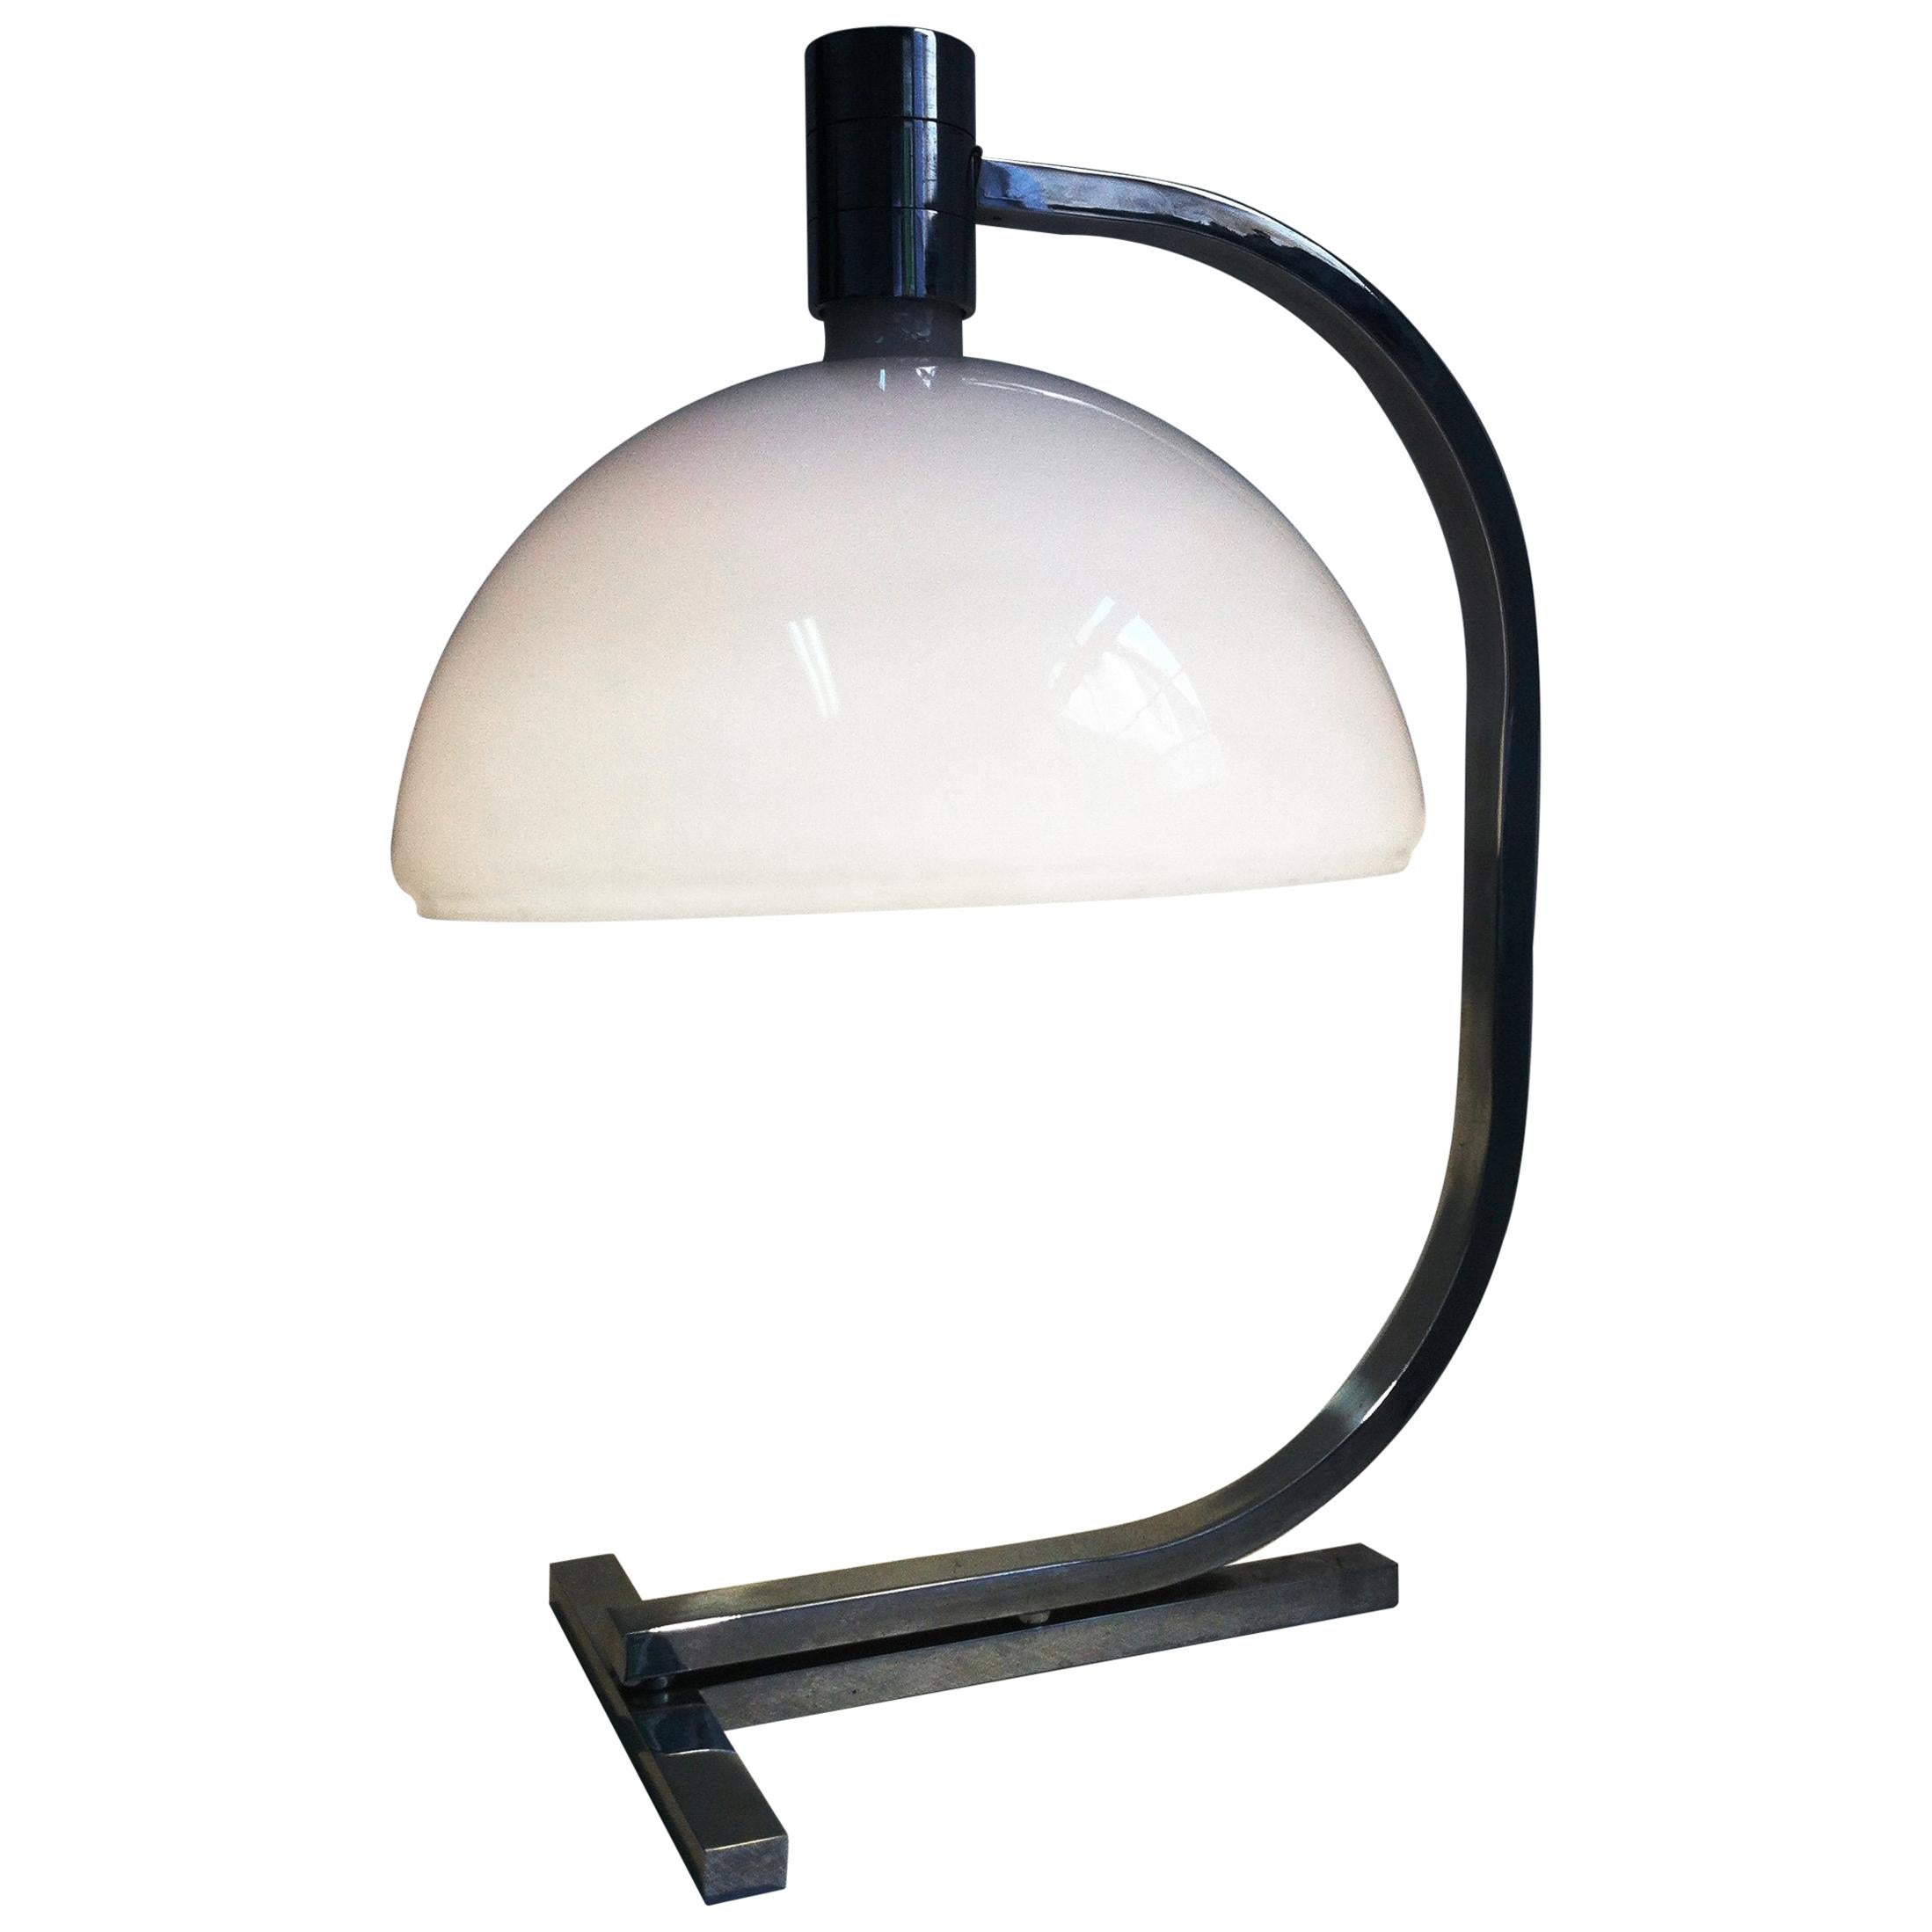 Midcentury AM/AS Table Lamp by Helg, Piva, and Albini for Sirrah Large, 1969 For Sale